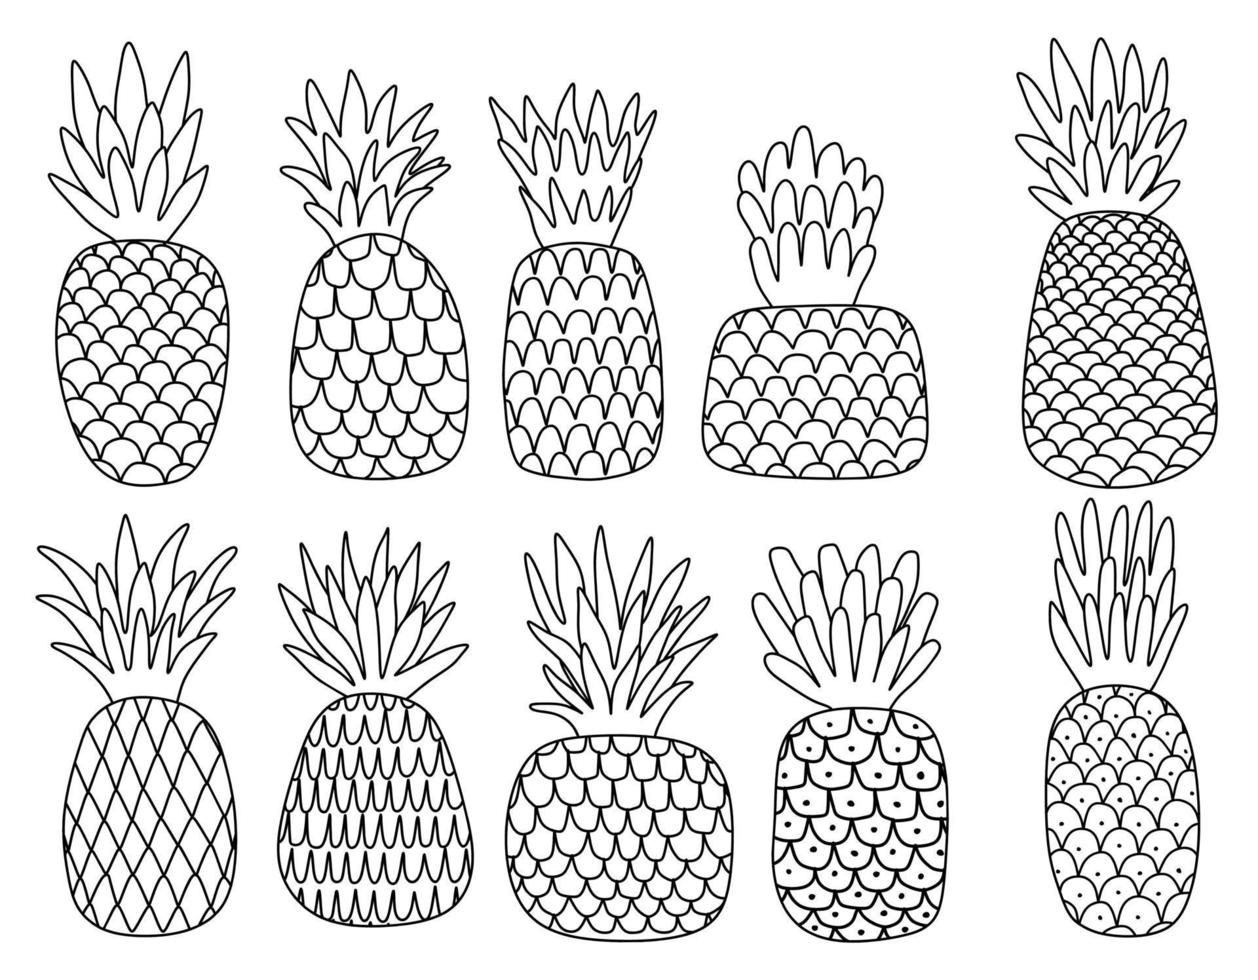 Vector illustration set of cute doodle pineapple